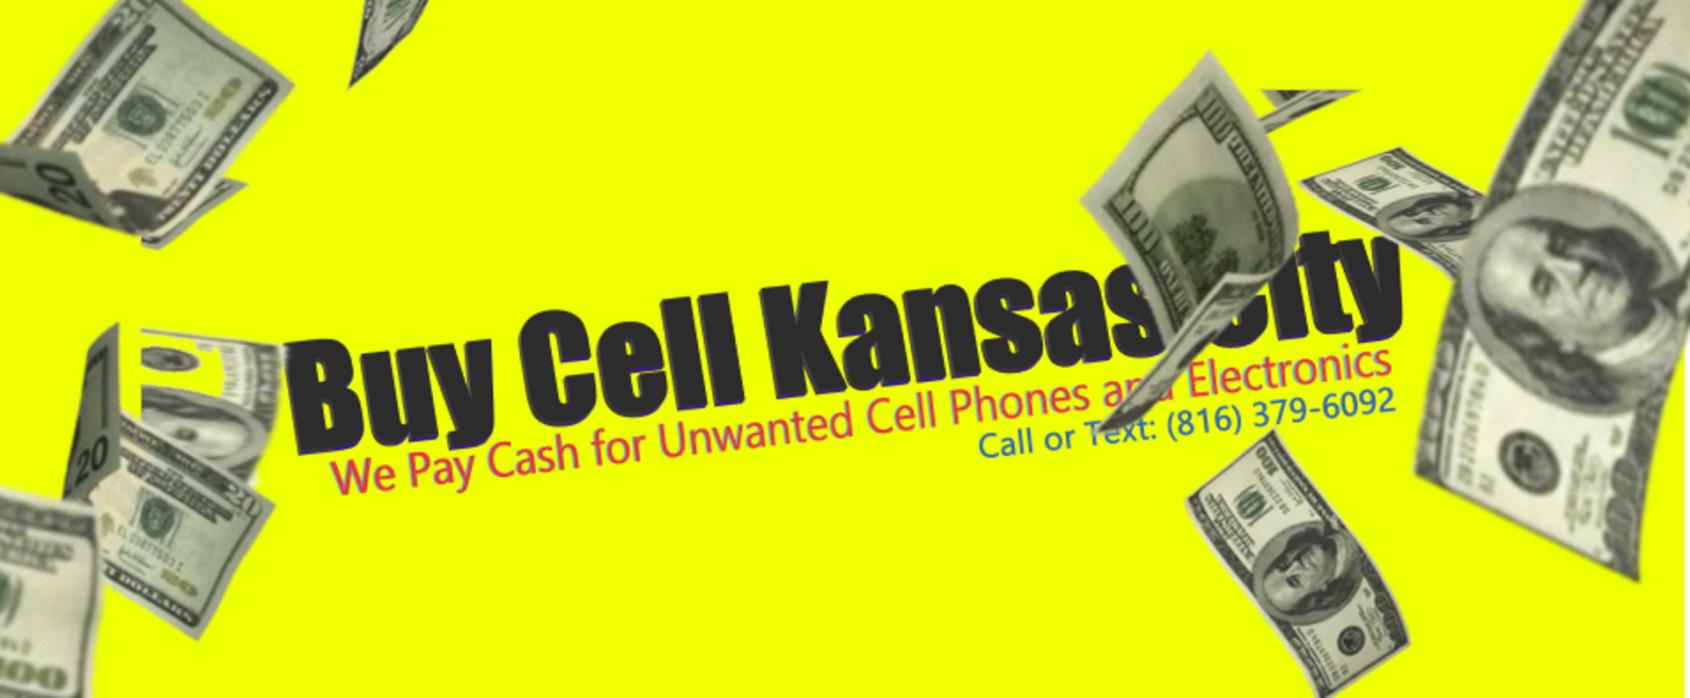 I Pay Cash for Unwanted Cell Phones and Electronics